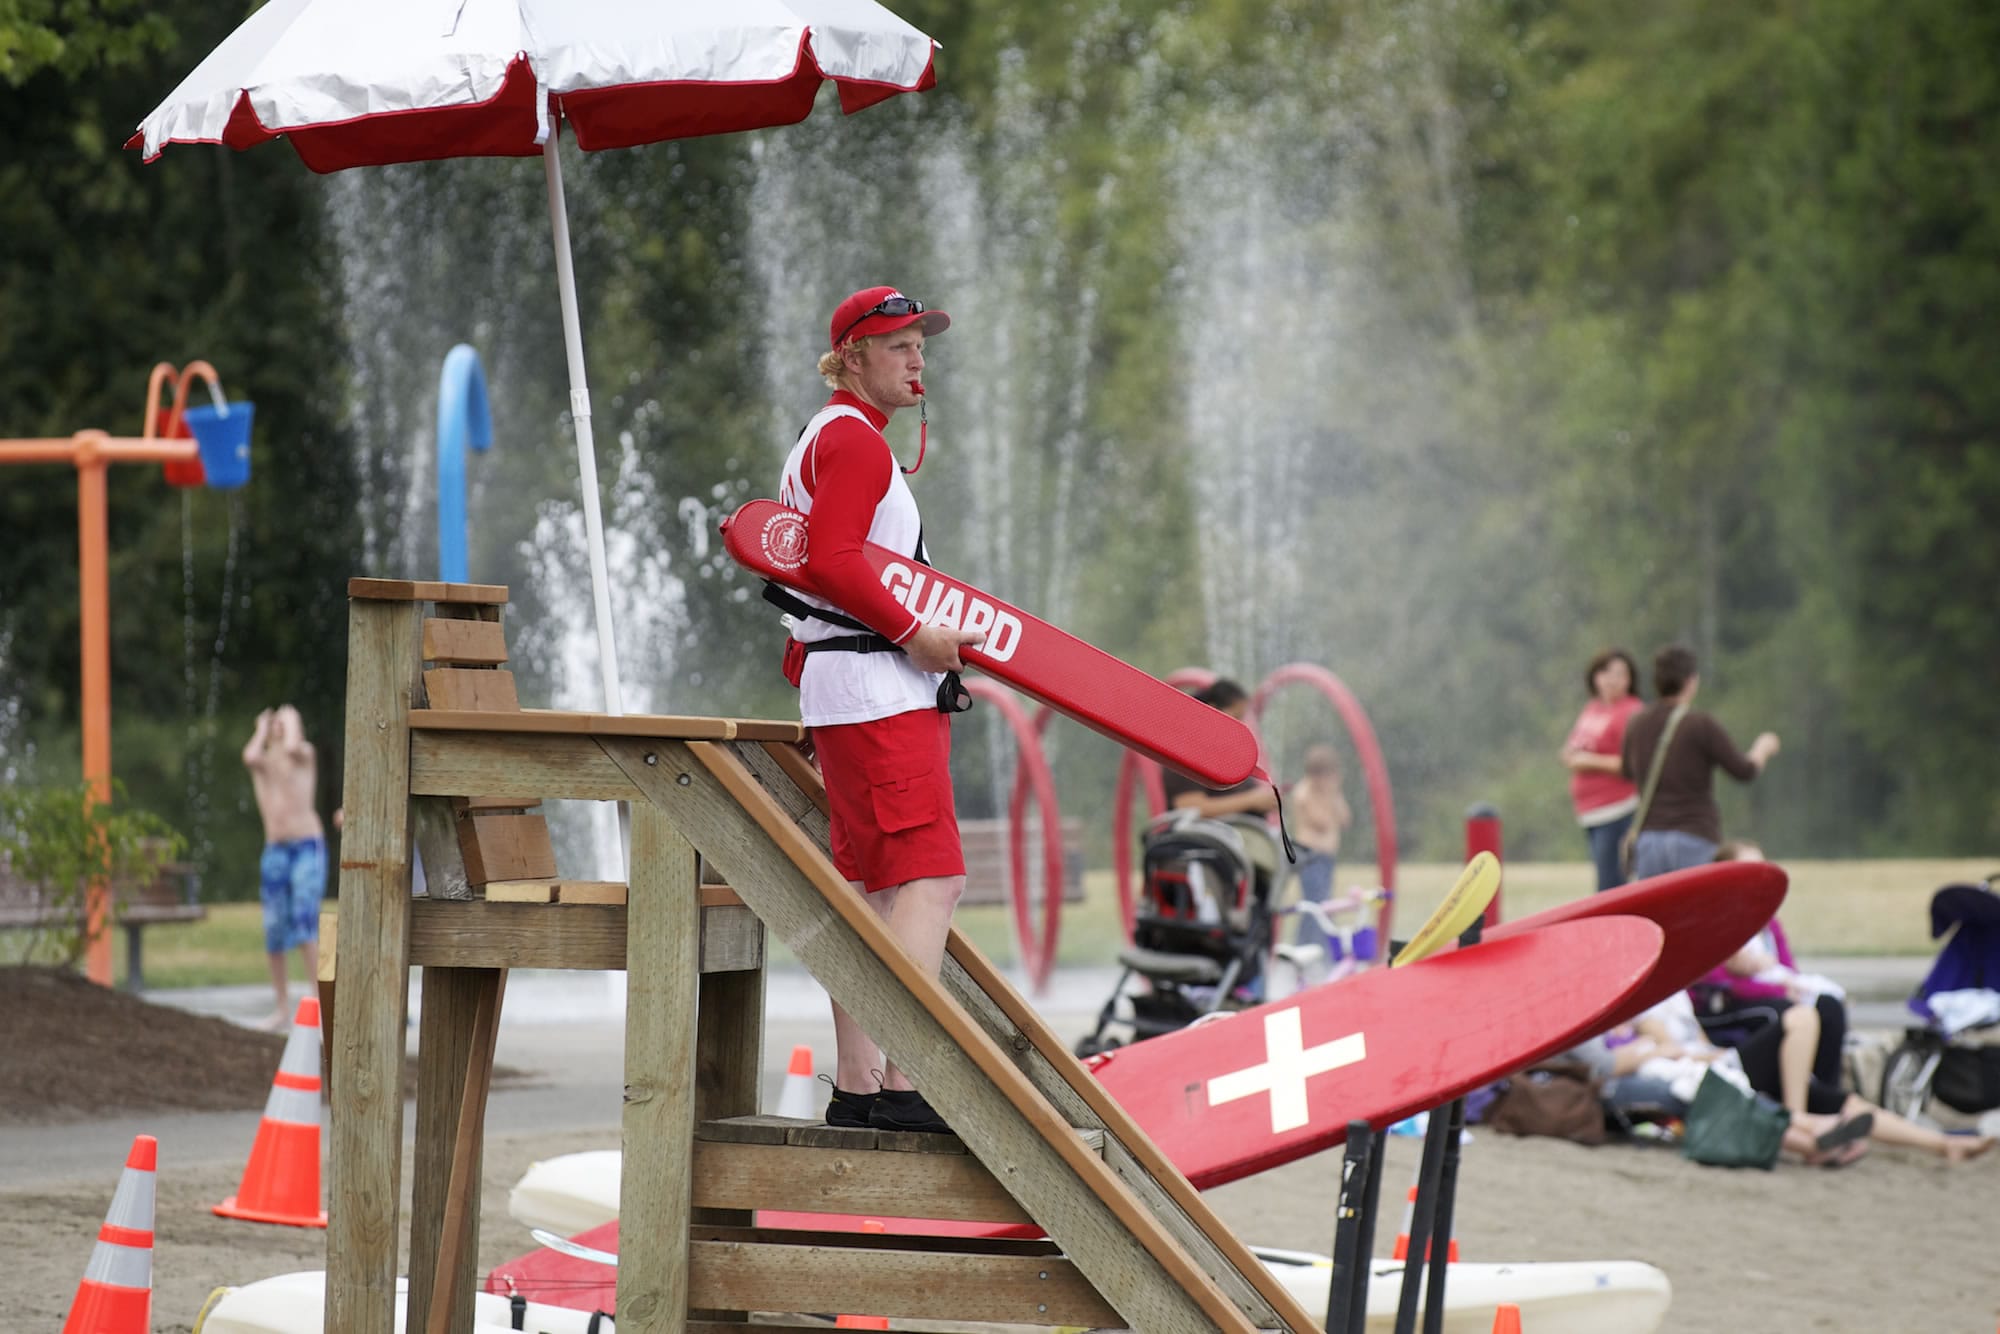 Photos by Steven Lane/The Columbian
Lifeguard Trevor Carnahan, 22, watches over swimmers at Salmon Creek Regional Park. Lifeguards returned to the park's Klineline Pond on Wednesday for the first time since 2010.